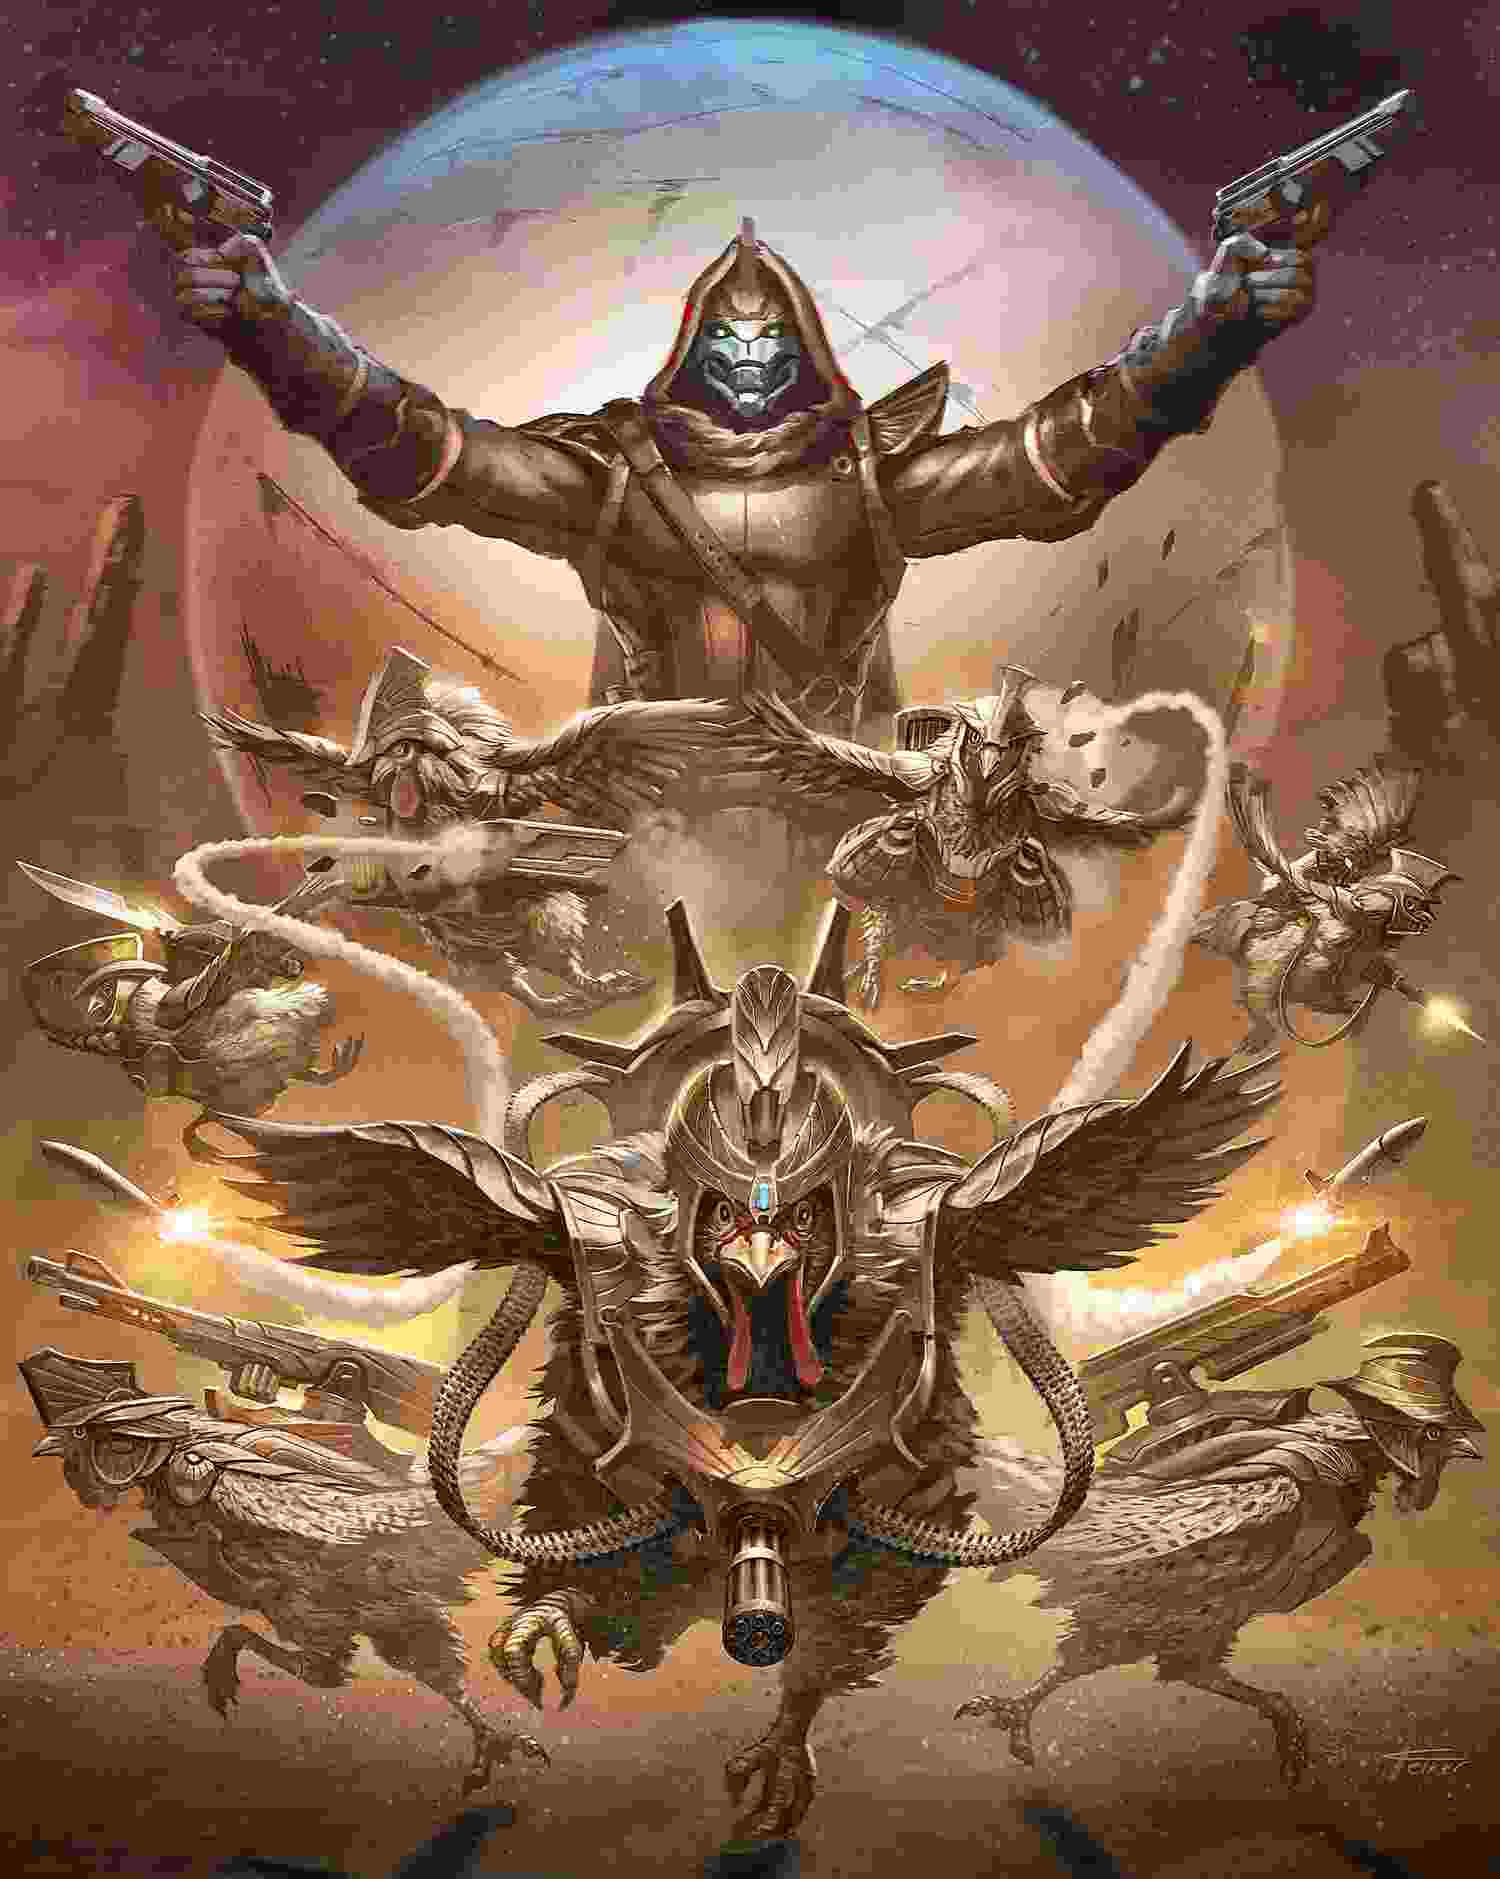 Empowered by the Traveler, Warlocks master the Arc to rise up against their enemies. Wallpaper